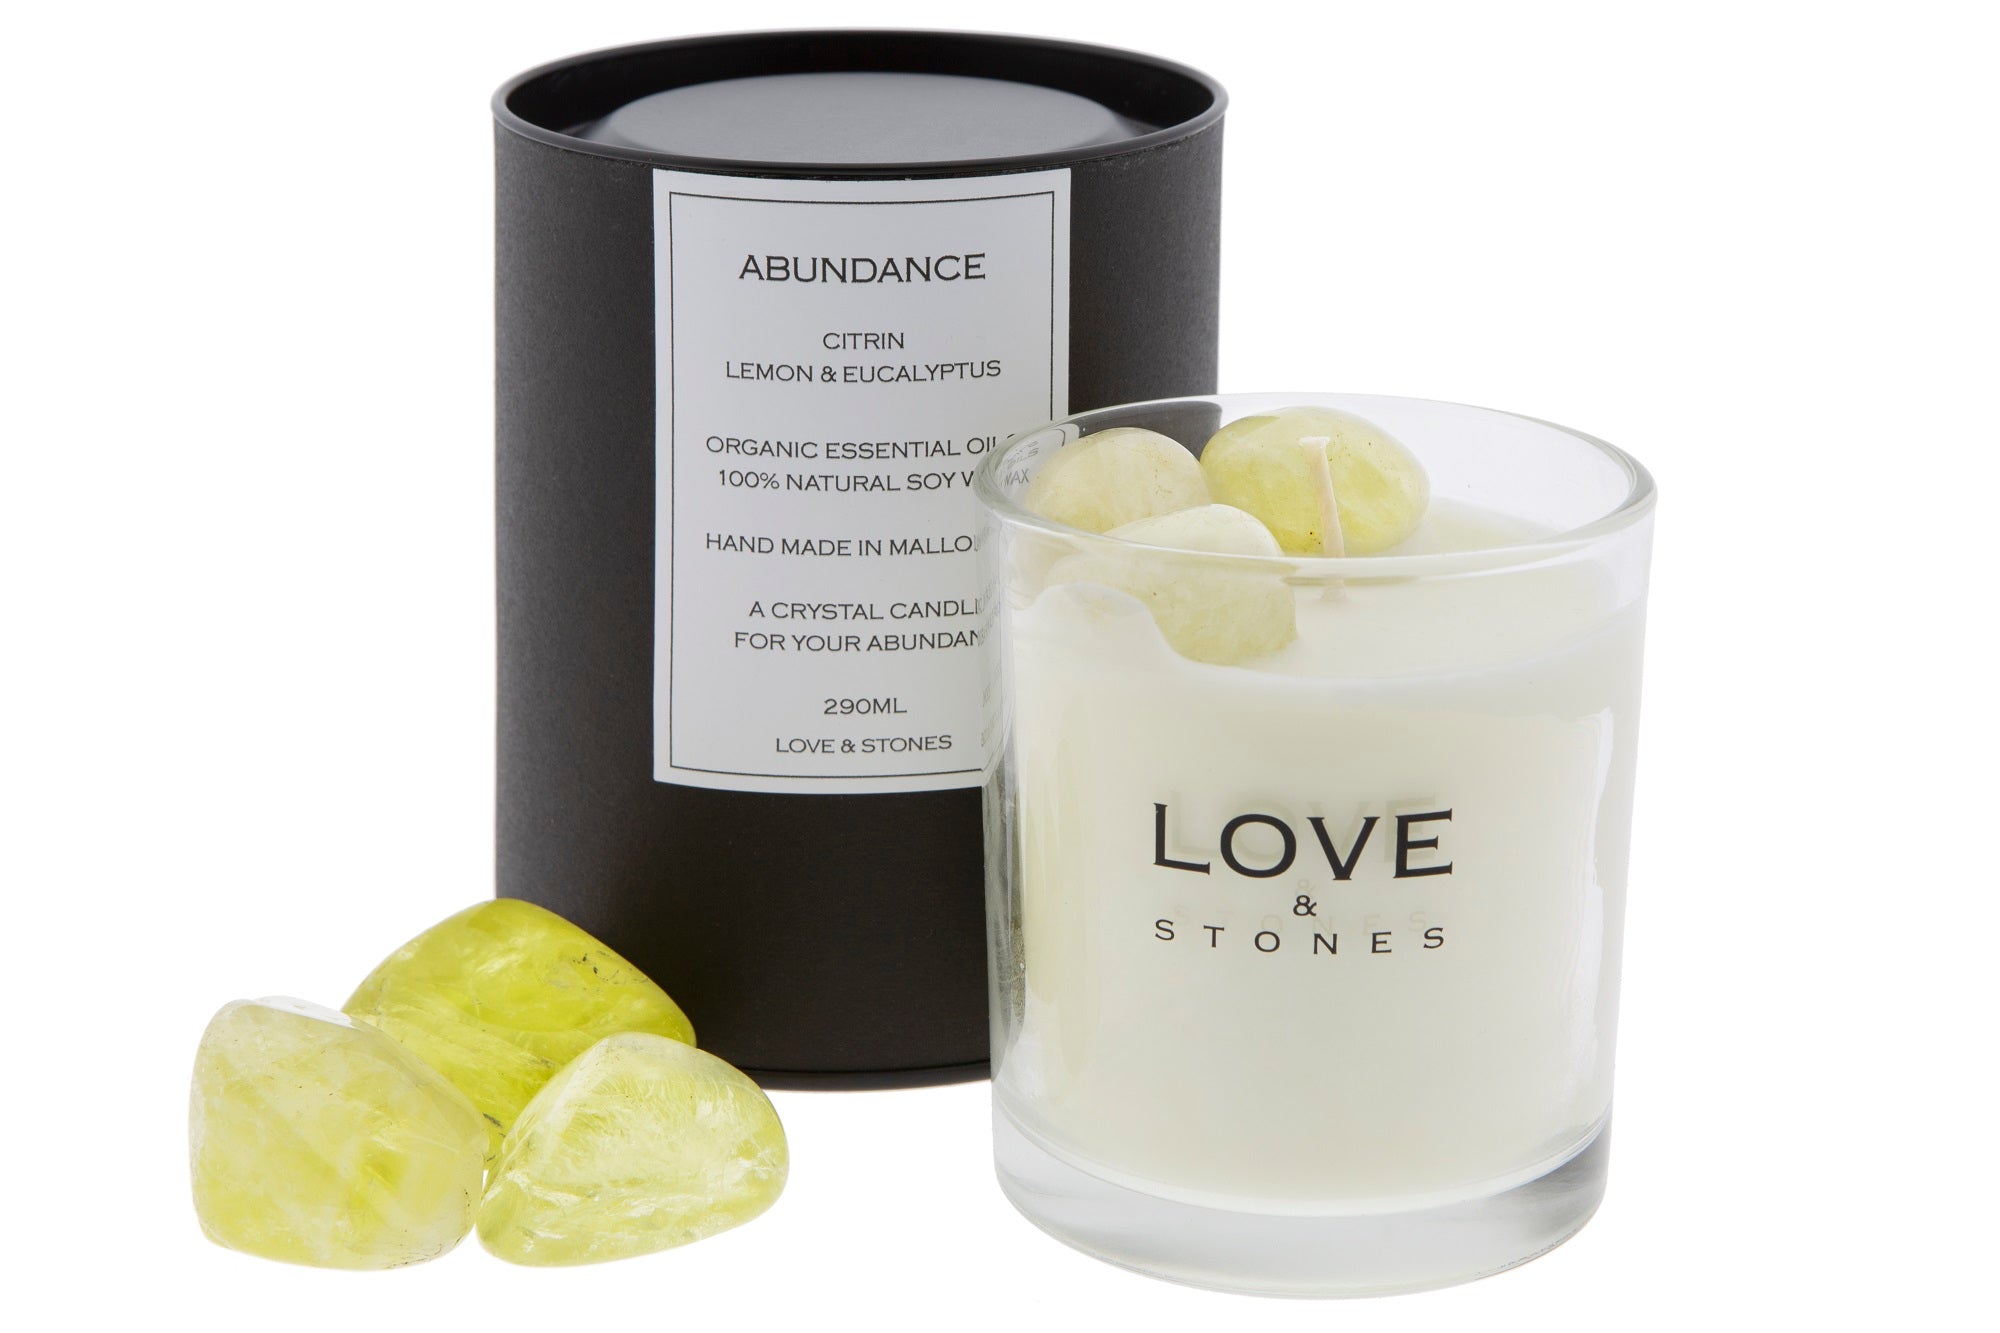 LOVE & STONES - Glass Abundance Citrin Scented Candle 20148